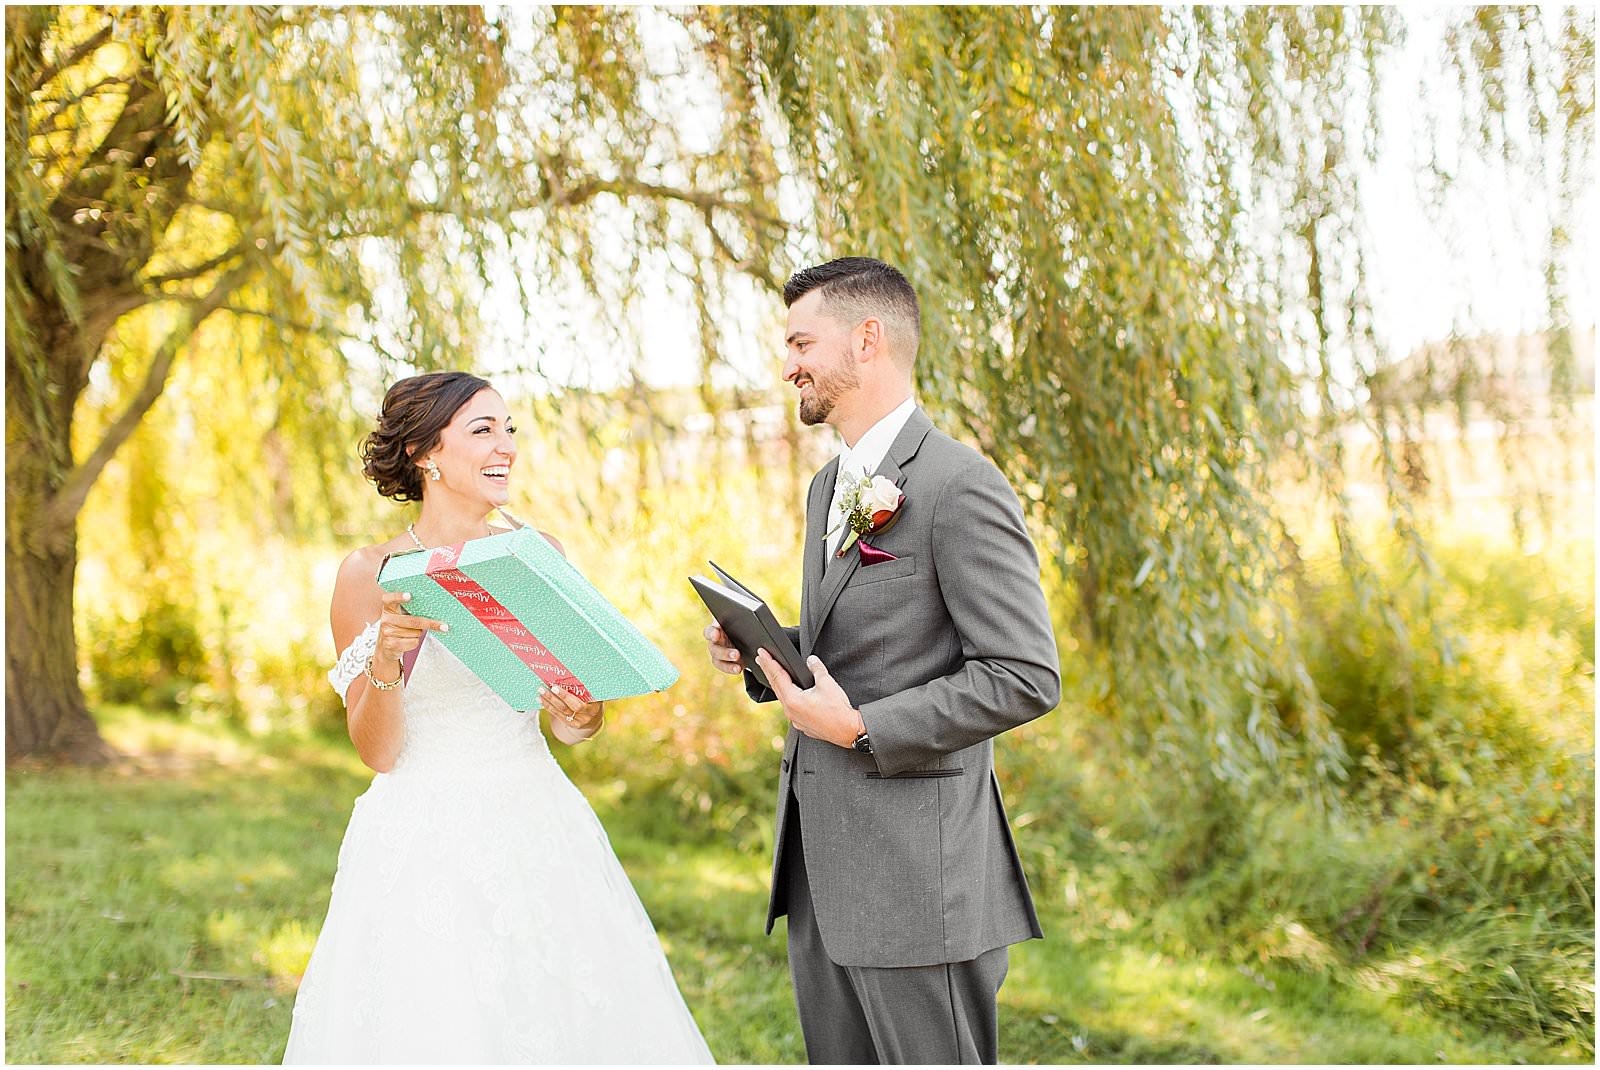 A Stunning Fall Wedding in Indianapolis, IN |. Sally and Andrew | Bret and Brandie Photography 0055.jpg